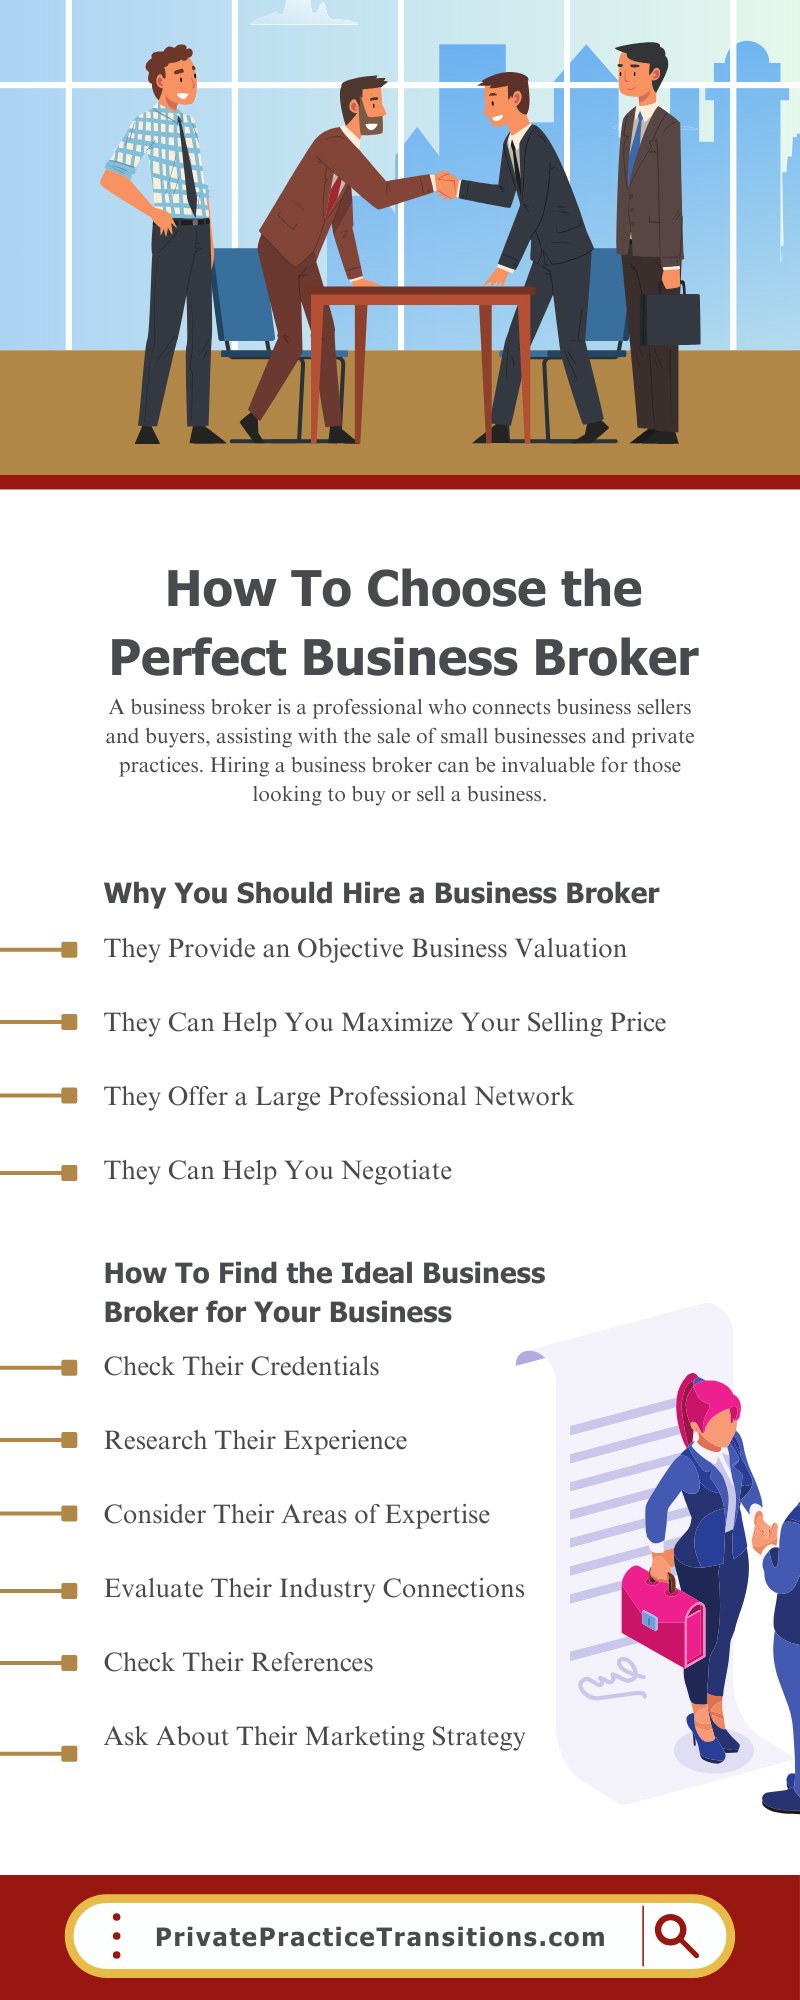 How To Choose the Perfect Business Broker